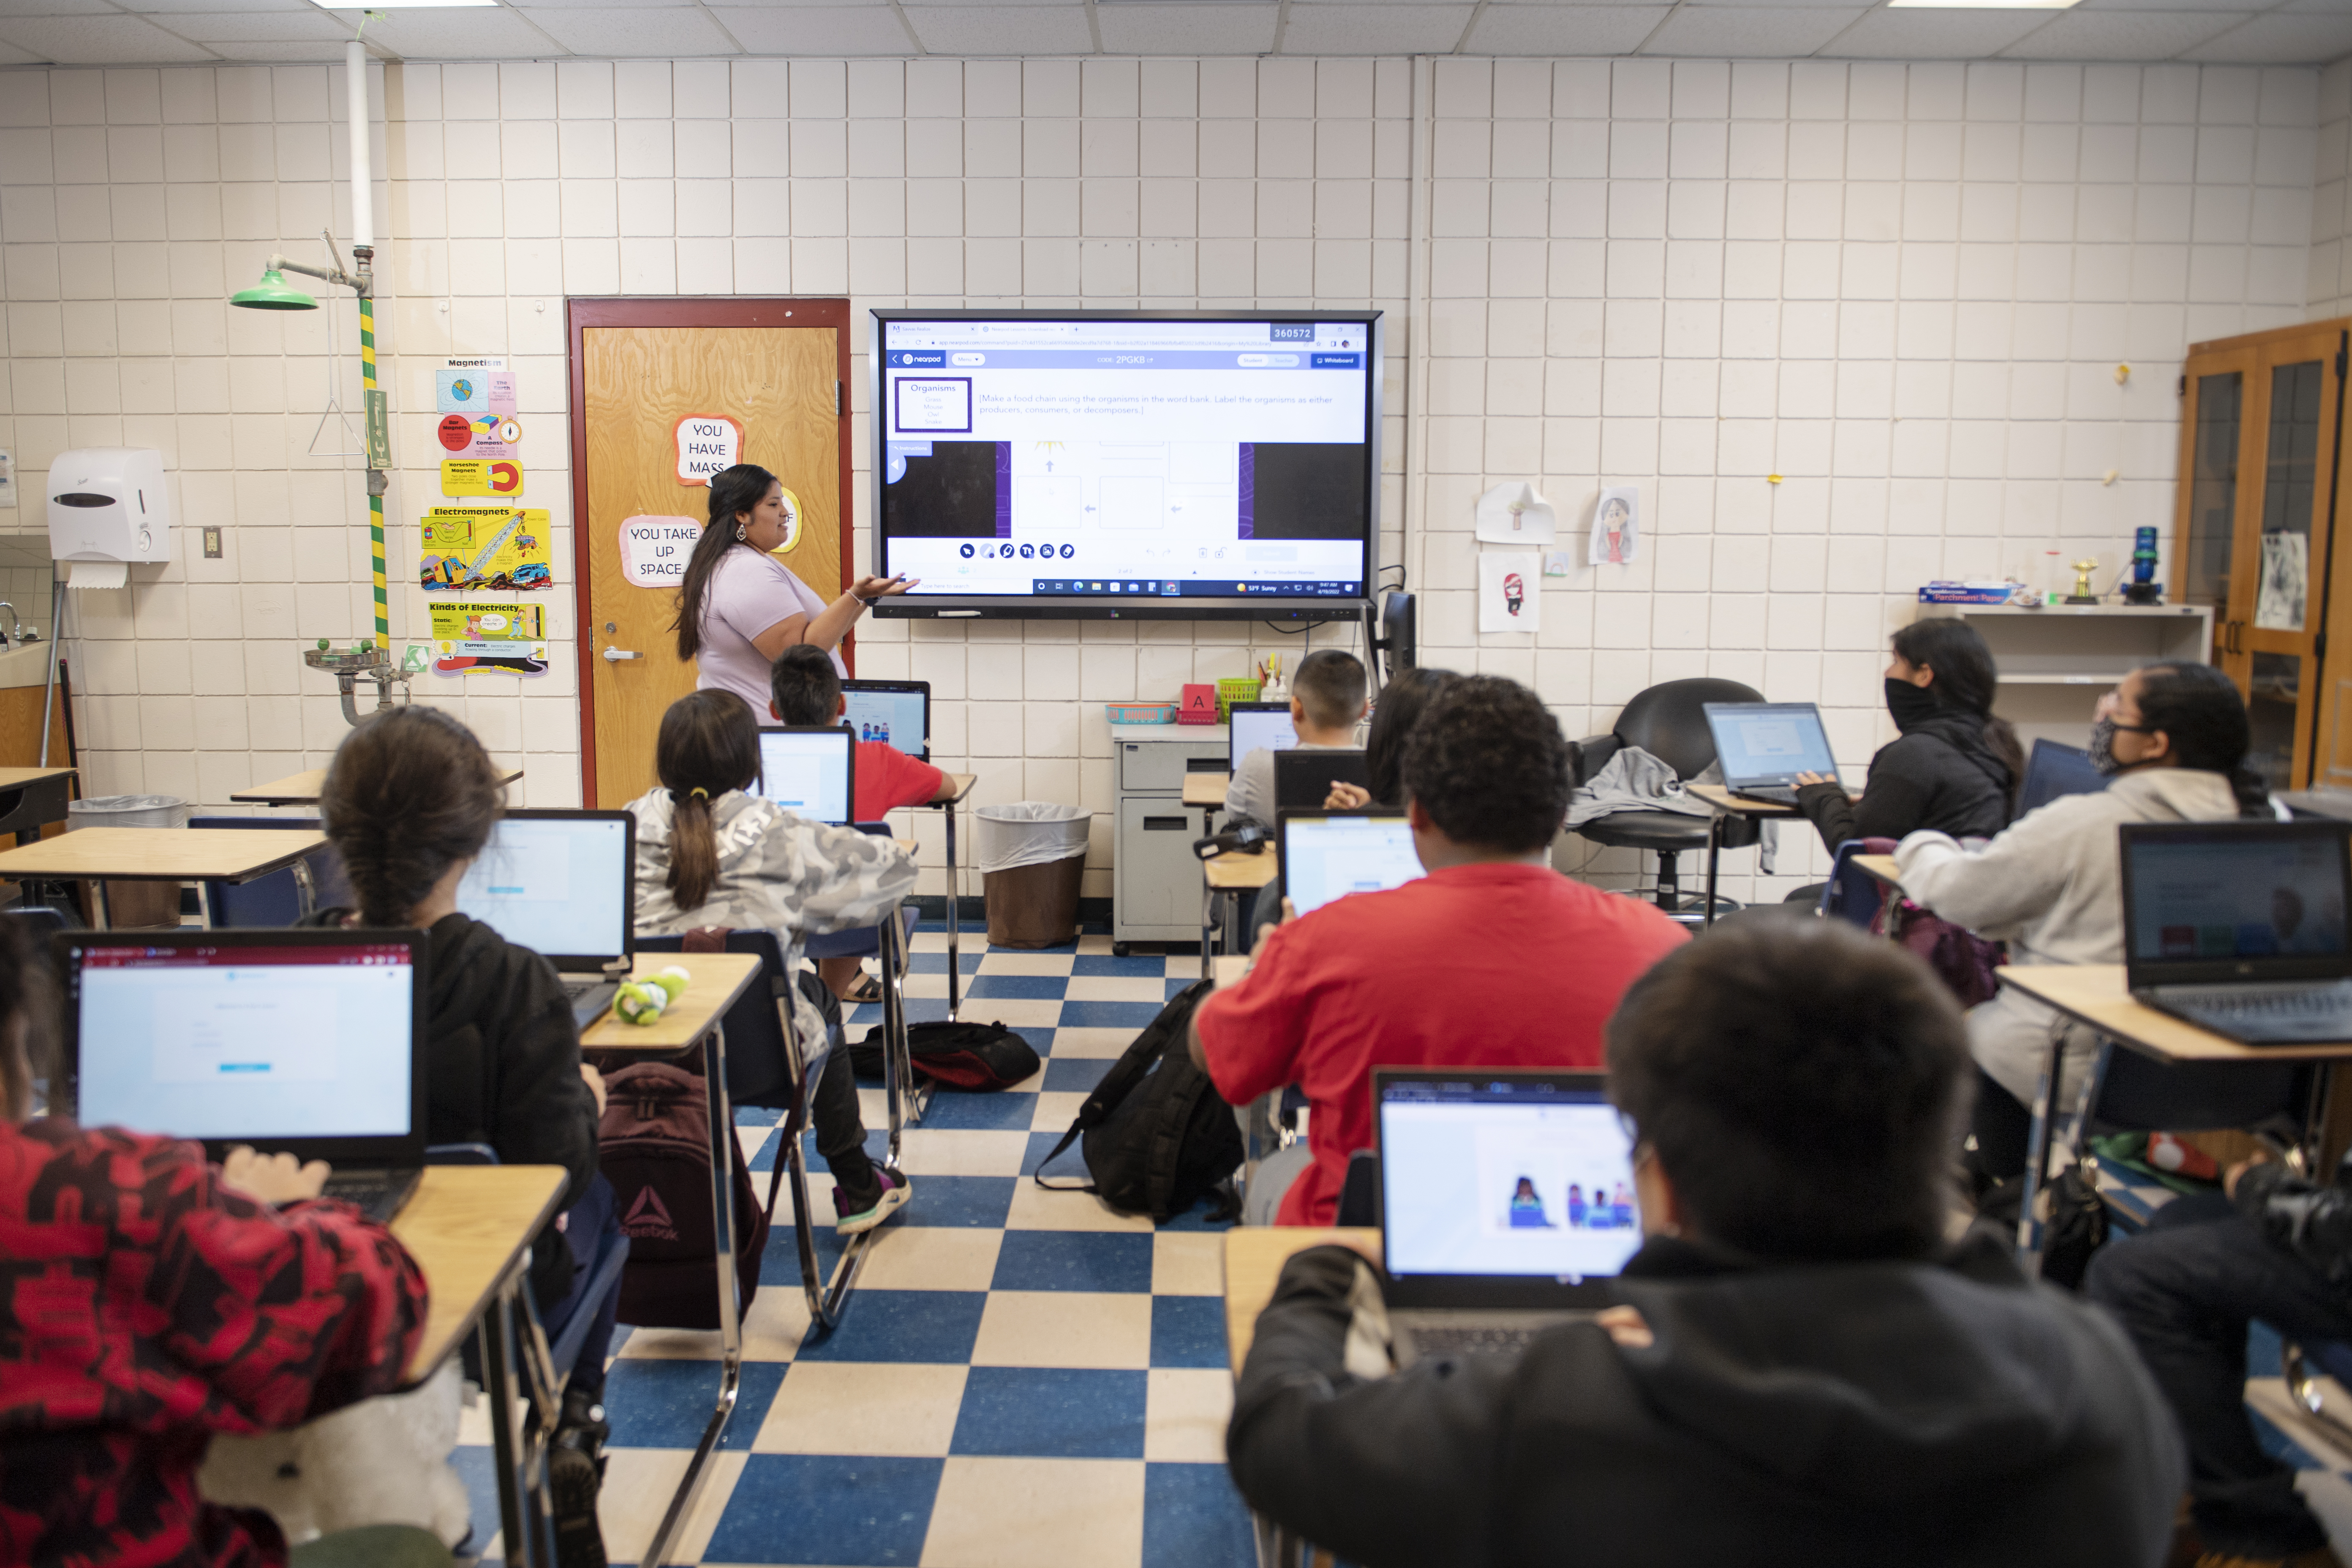 Choctaw young woman with dark hair in classroom with video screen and children